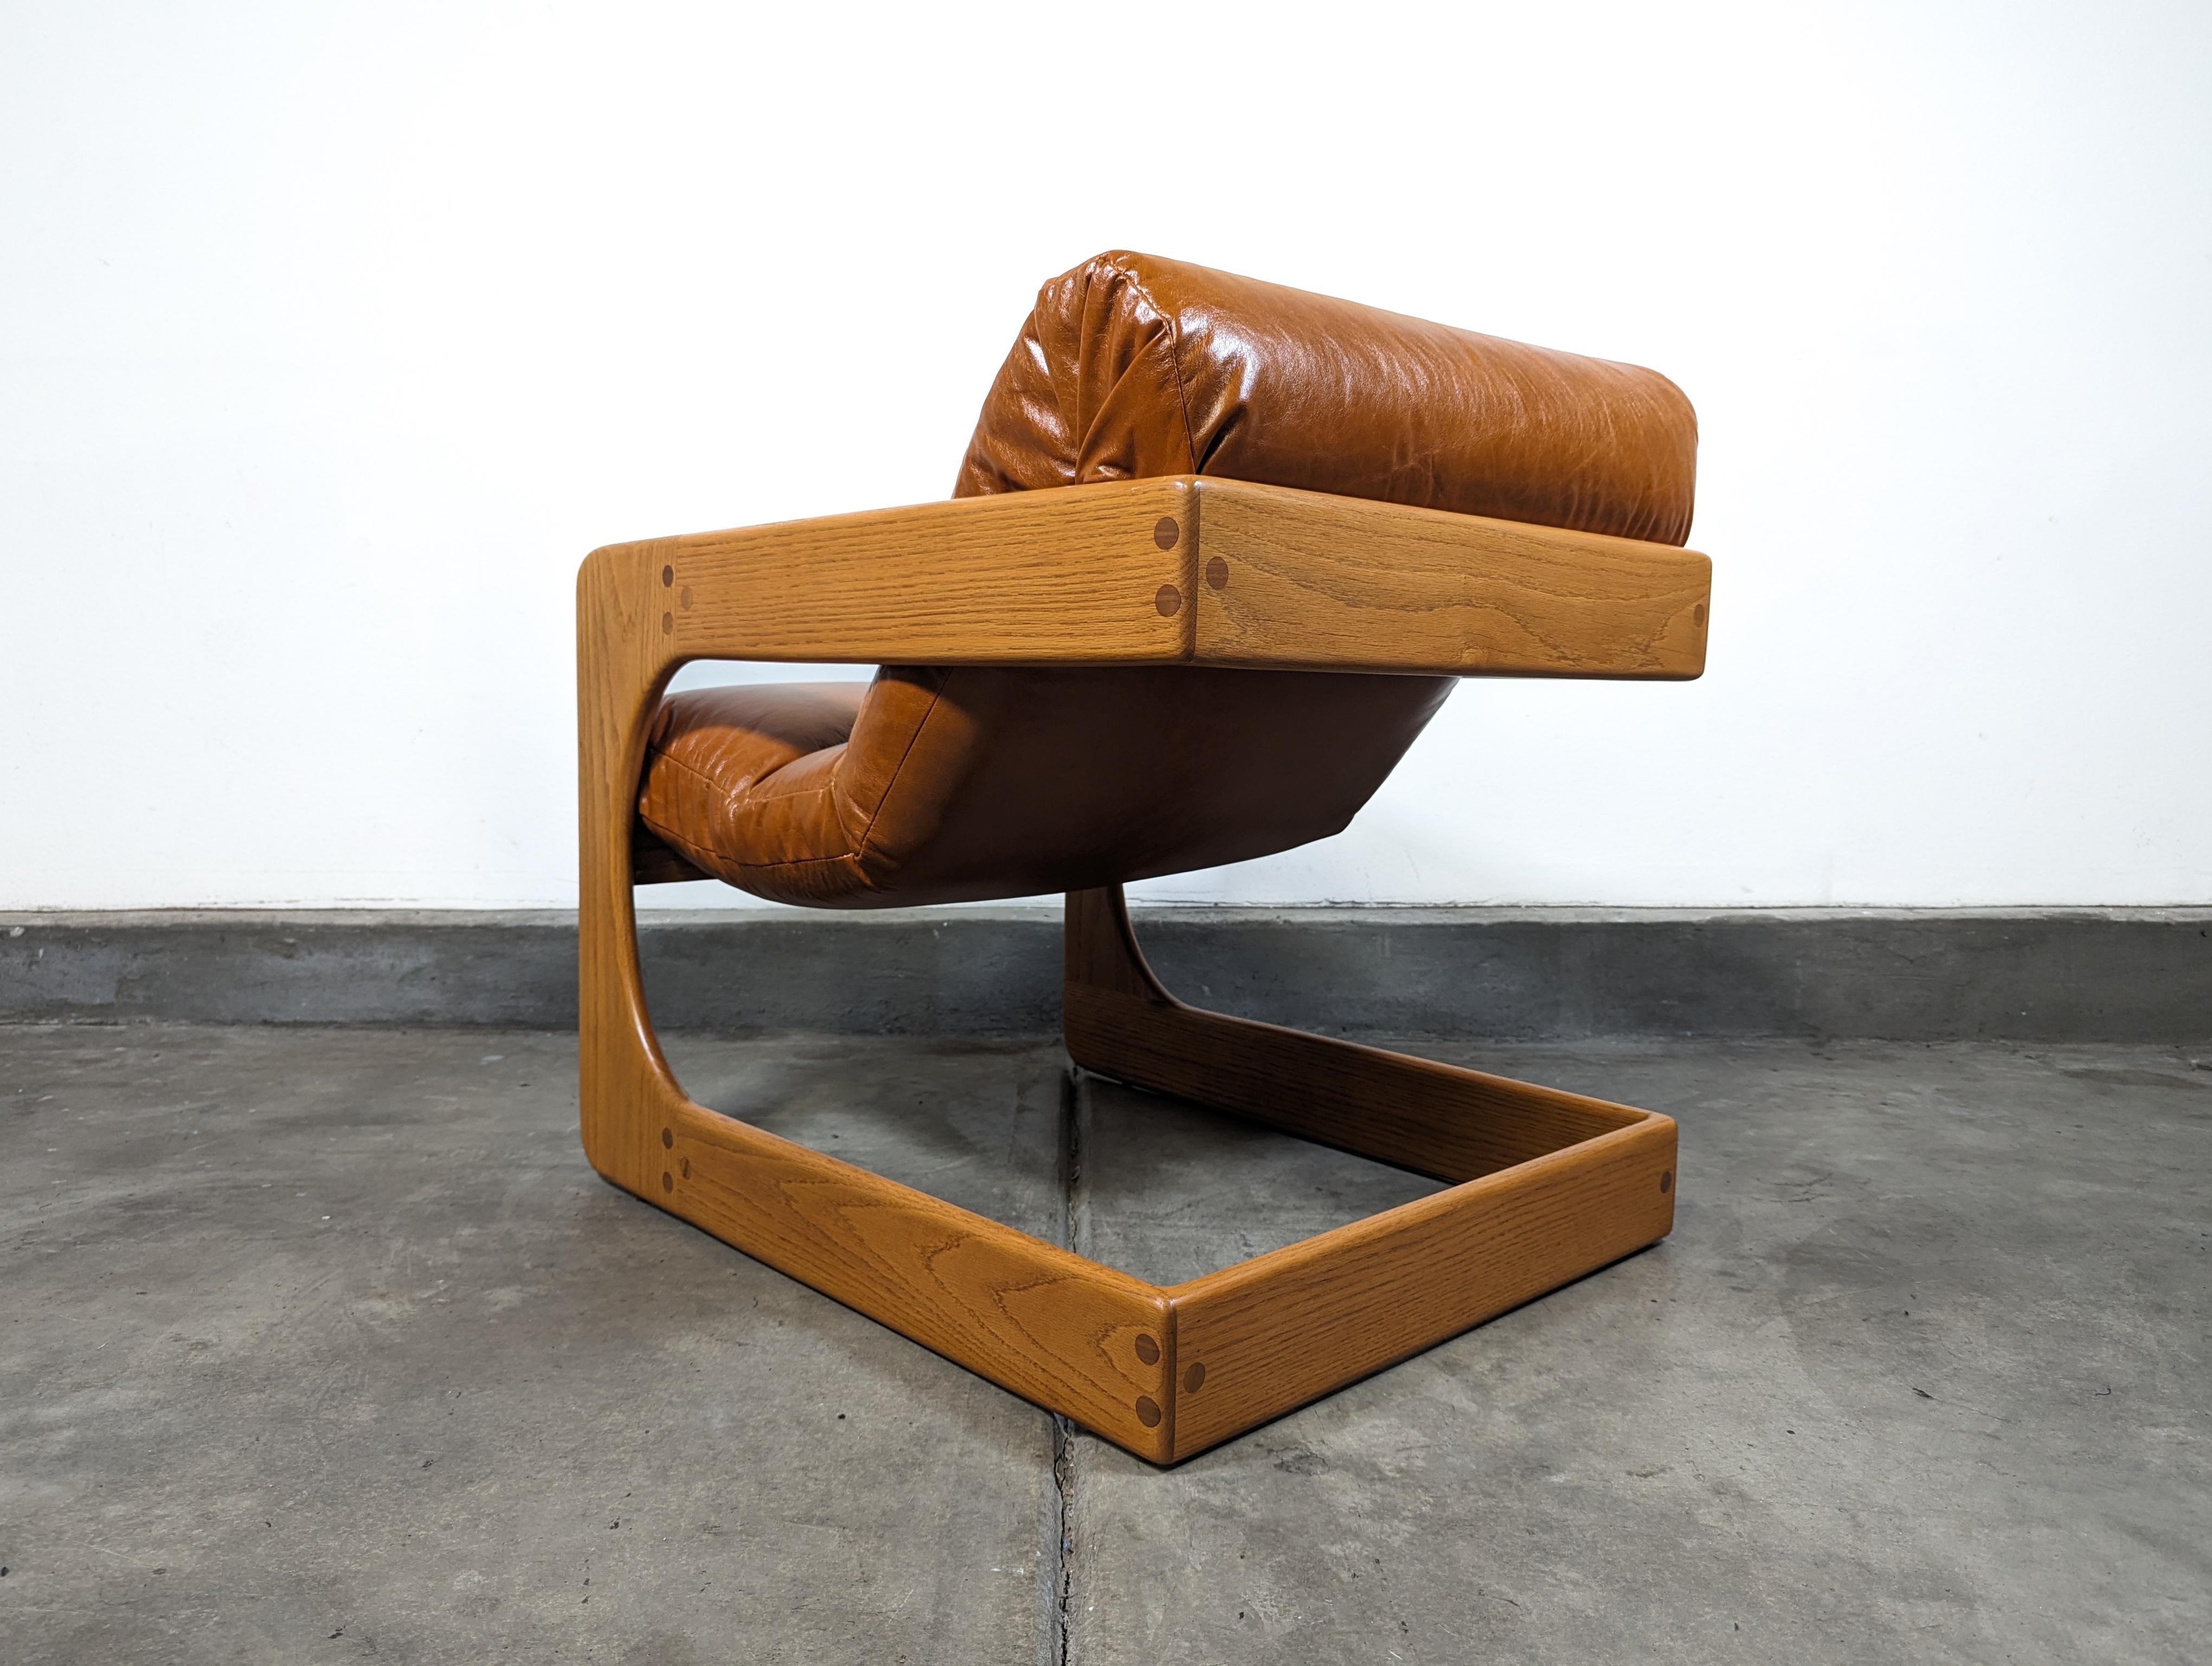 Hand-Crafted Mid Century Cantilevered Lounge Chair by Lou Hodges, Cognac Leather, 1970s